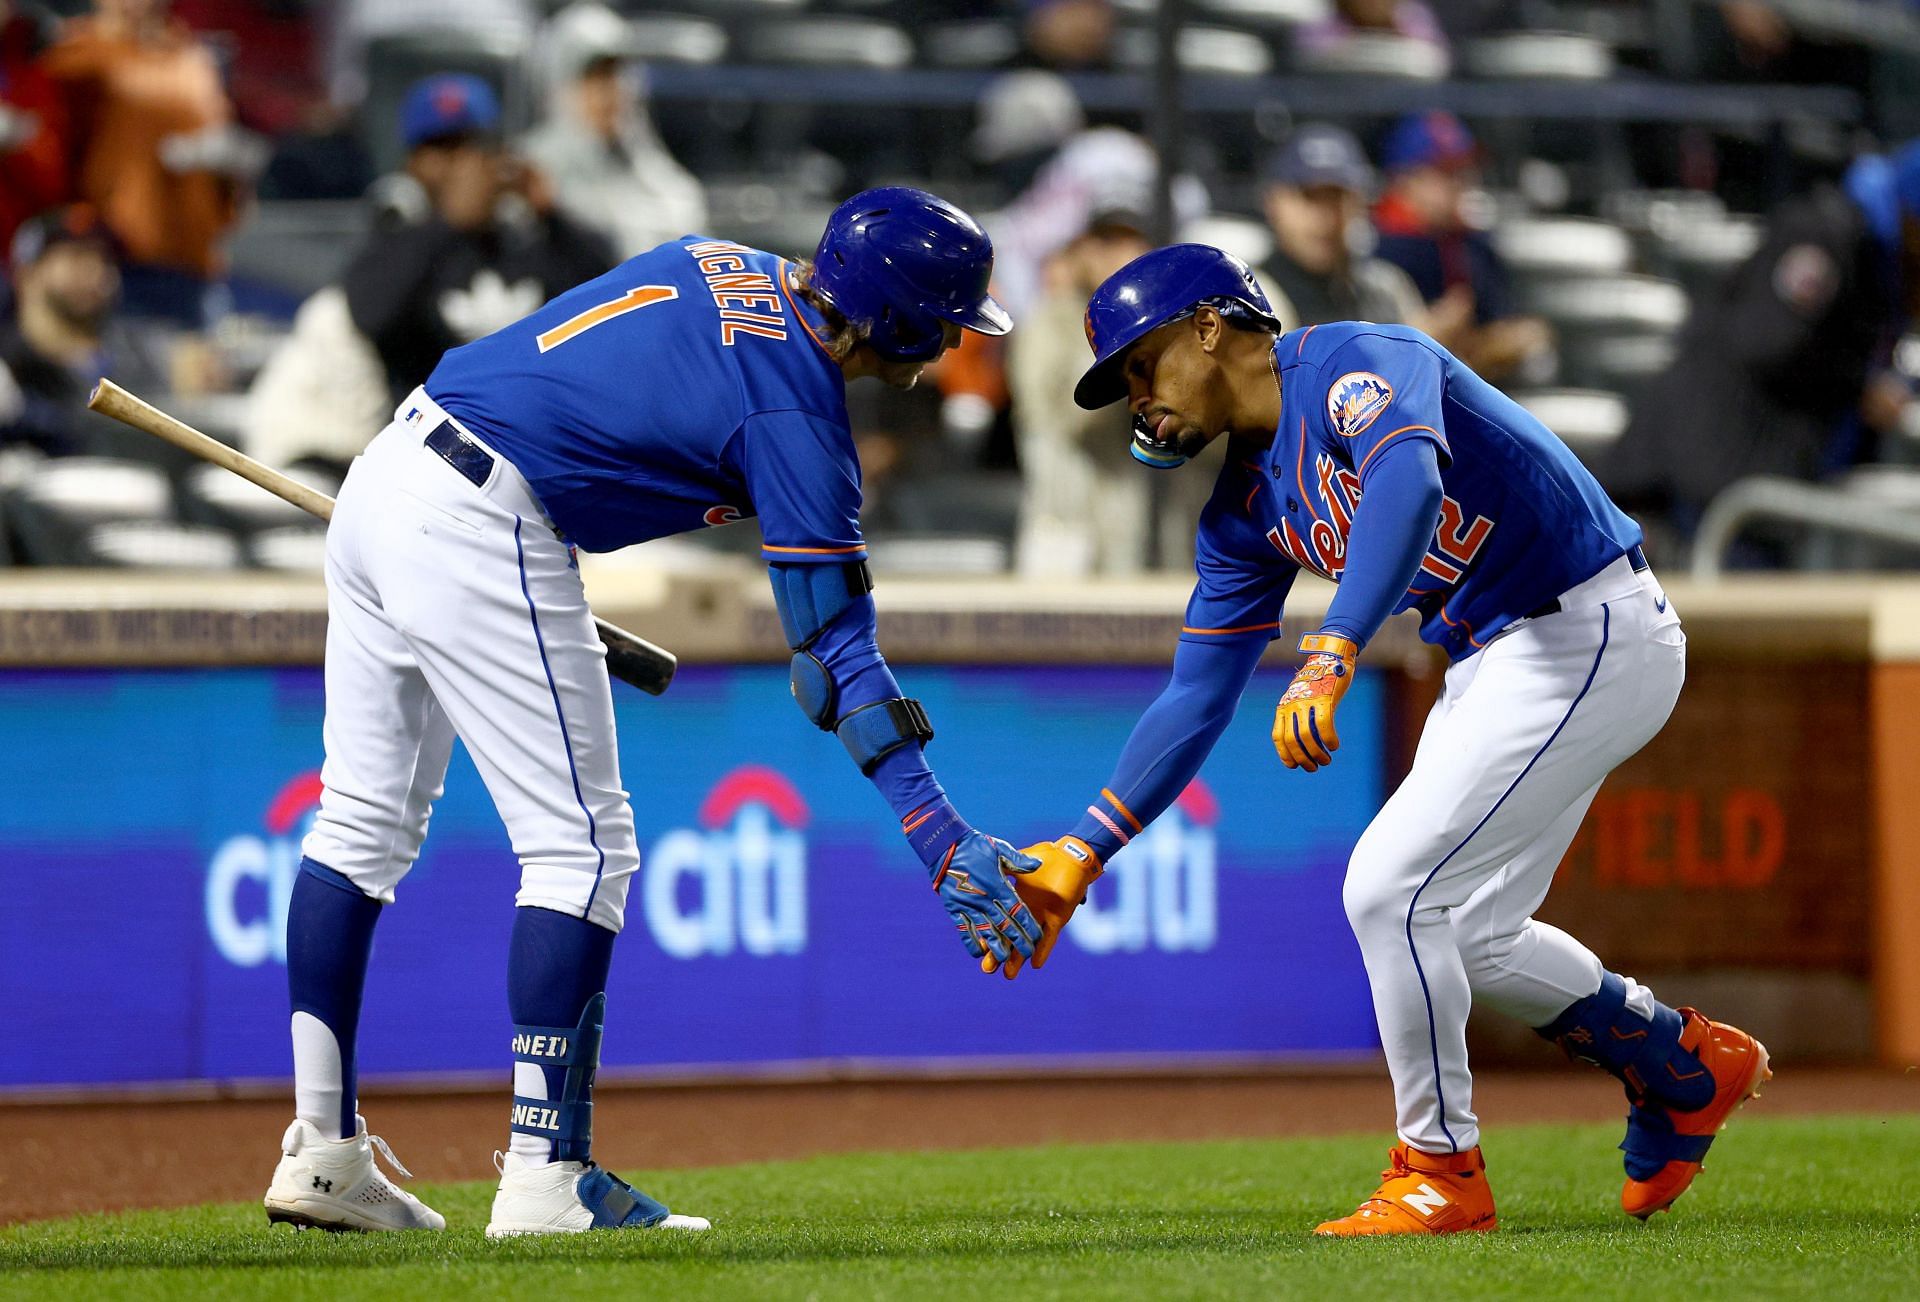 Carlos Rodón stymies Mets, wins first game as a New York Yankee